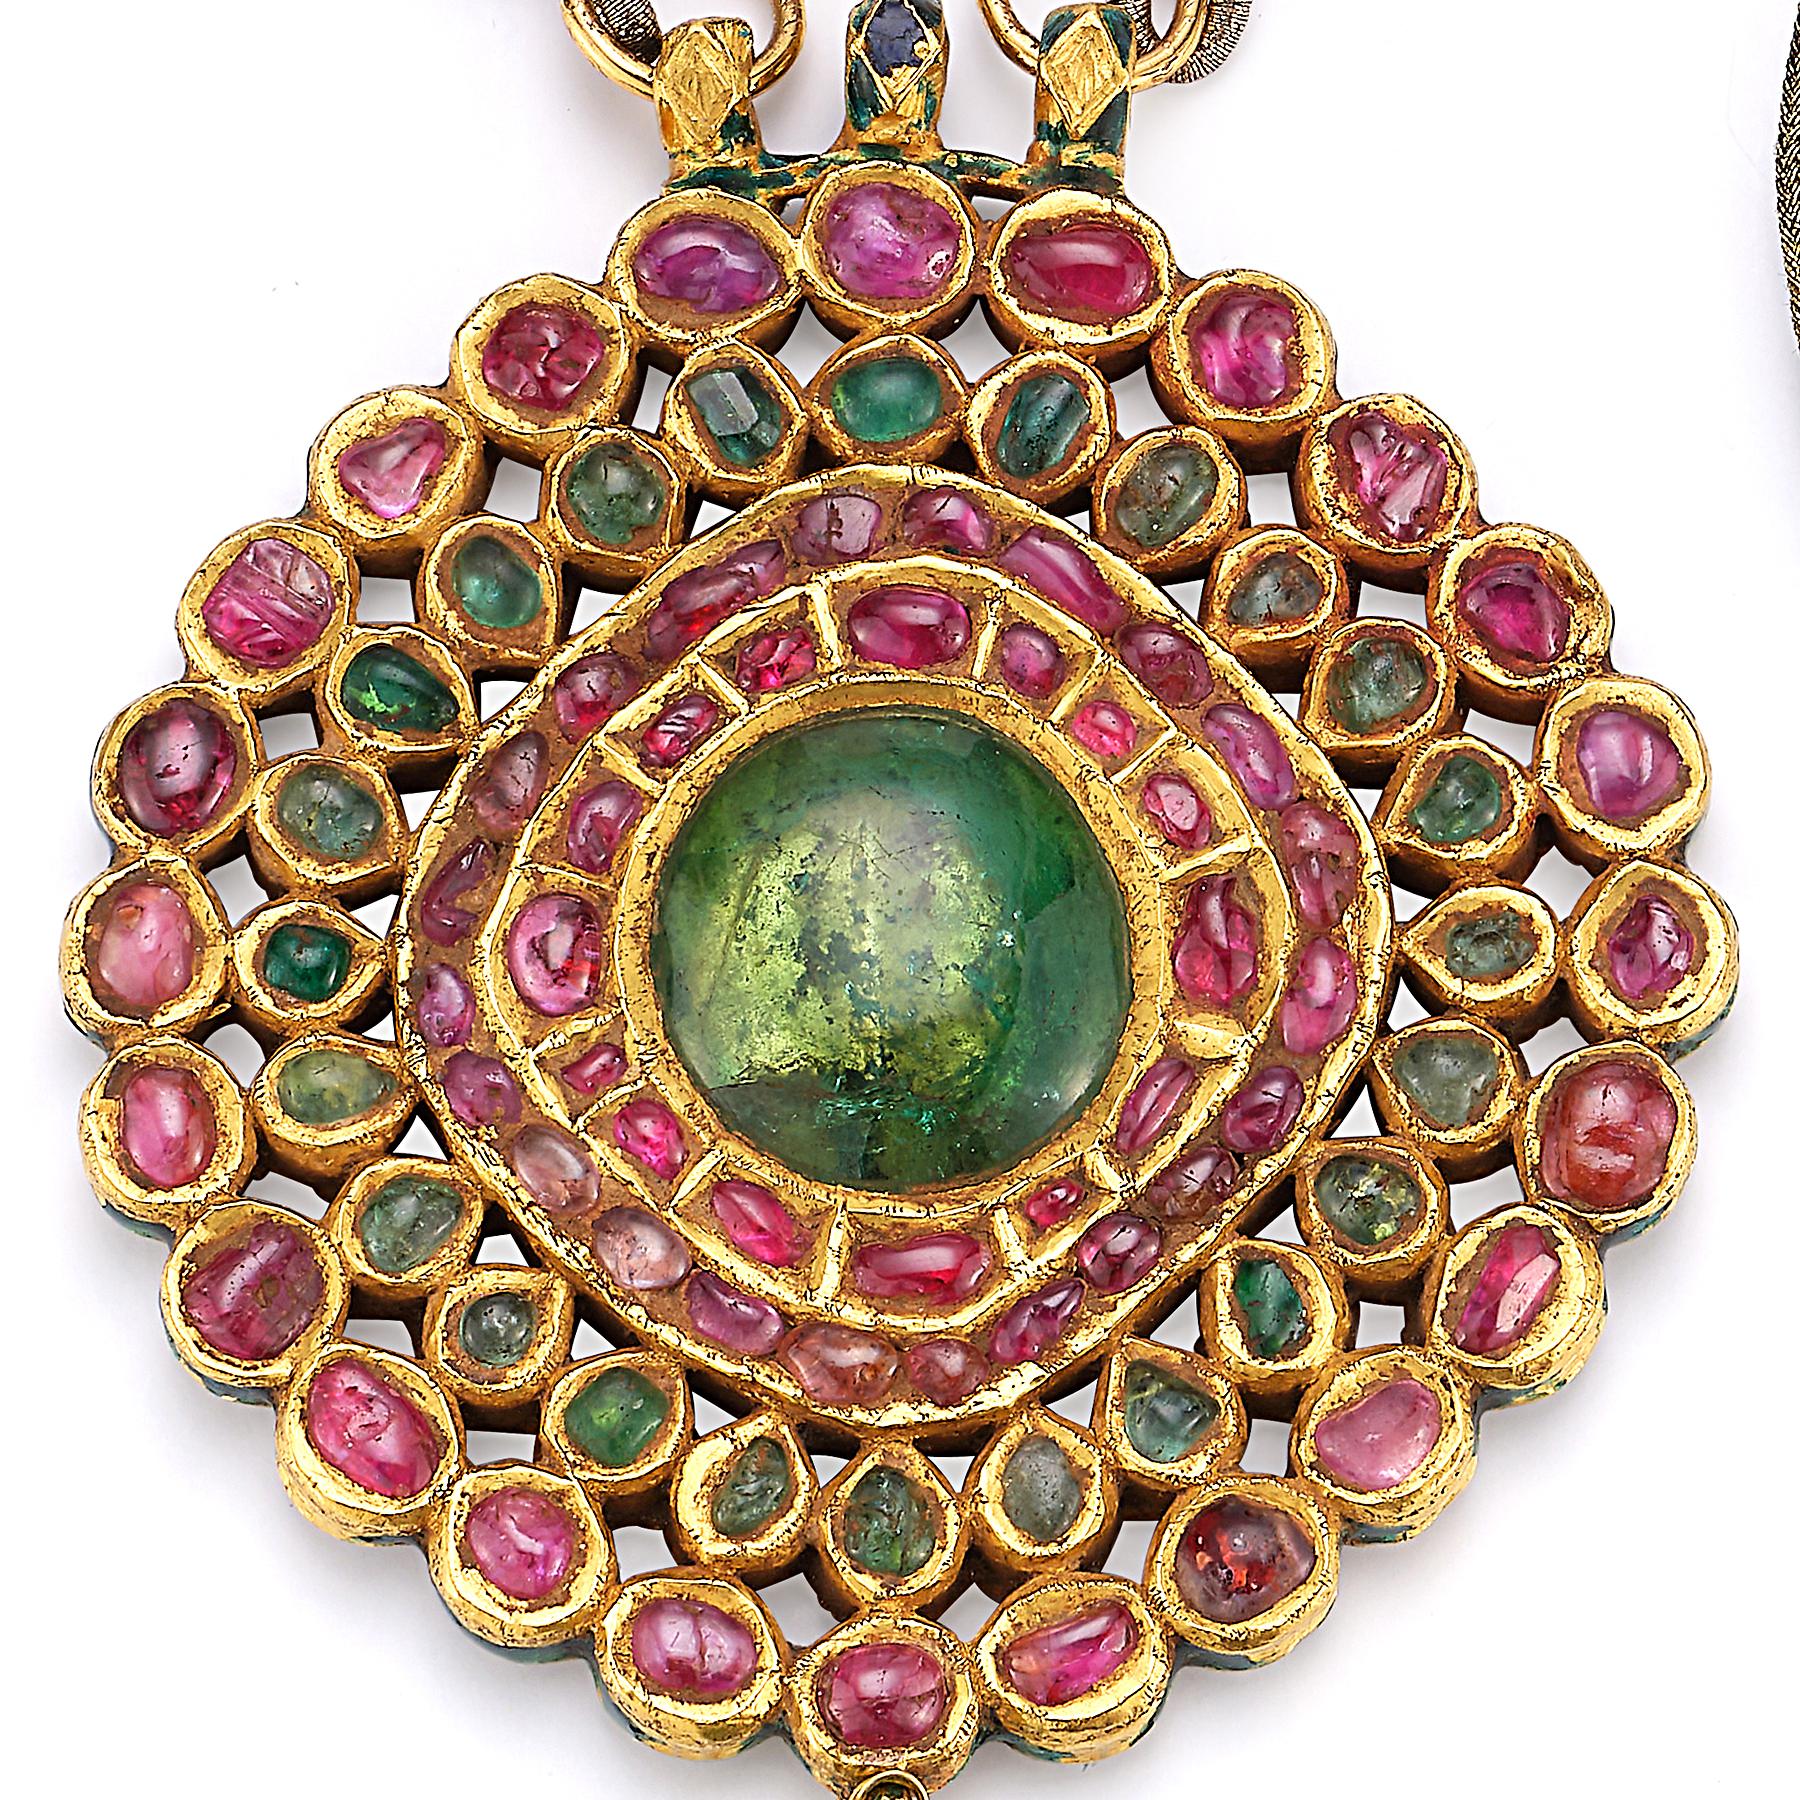 Large Size Antique Indian Pendant Necklace

Set with large cabochon emerald surrounded by cabochon emeralds & rubies set in 22k yellow gold with an emerald bead drop. 
Superb multi color hand enamel work on the reverse.

Necklace length is